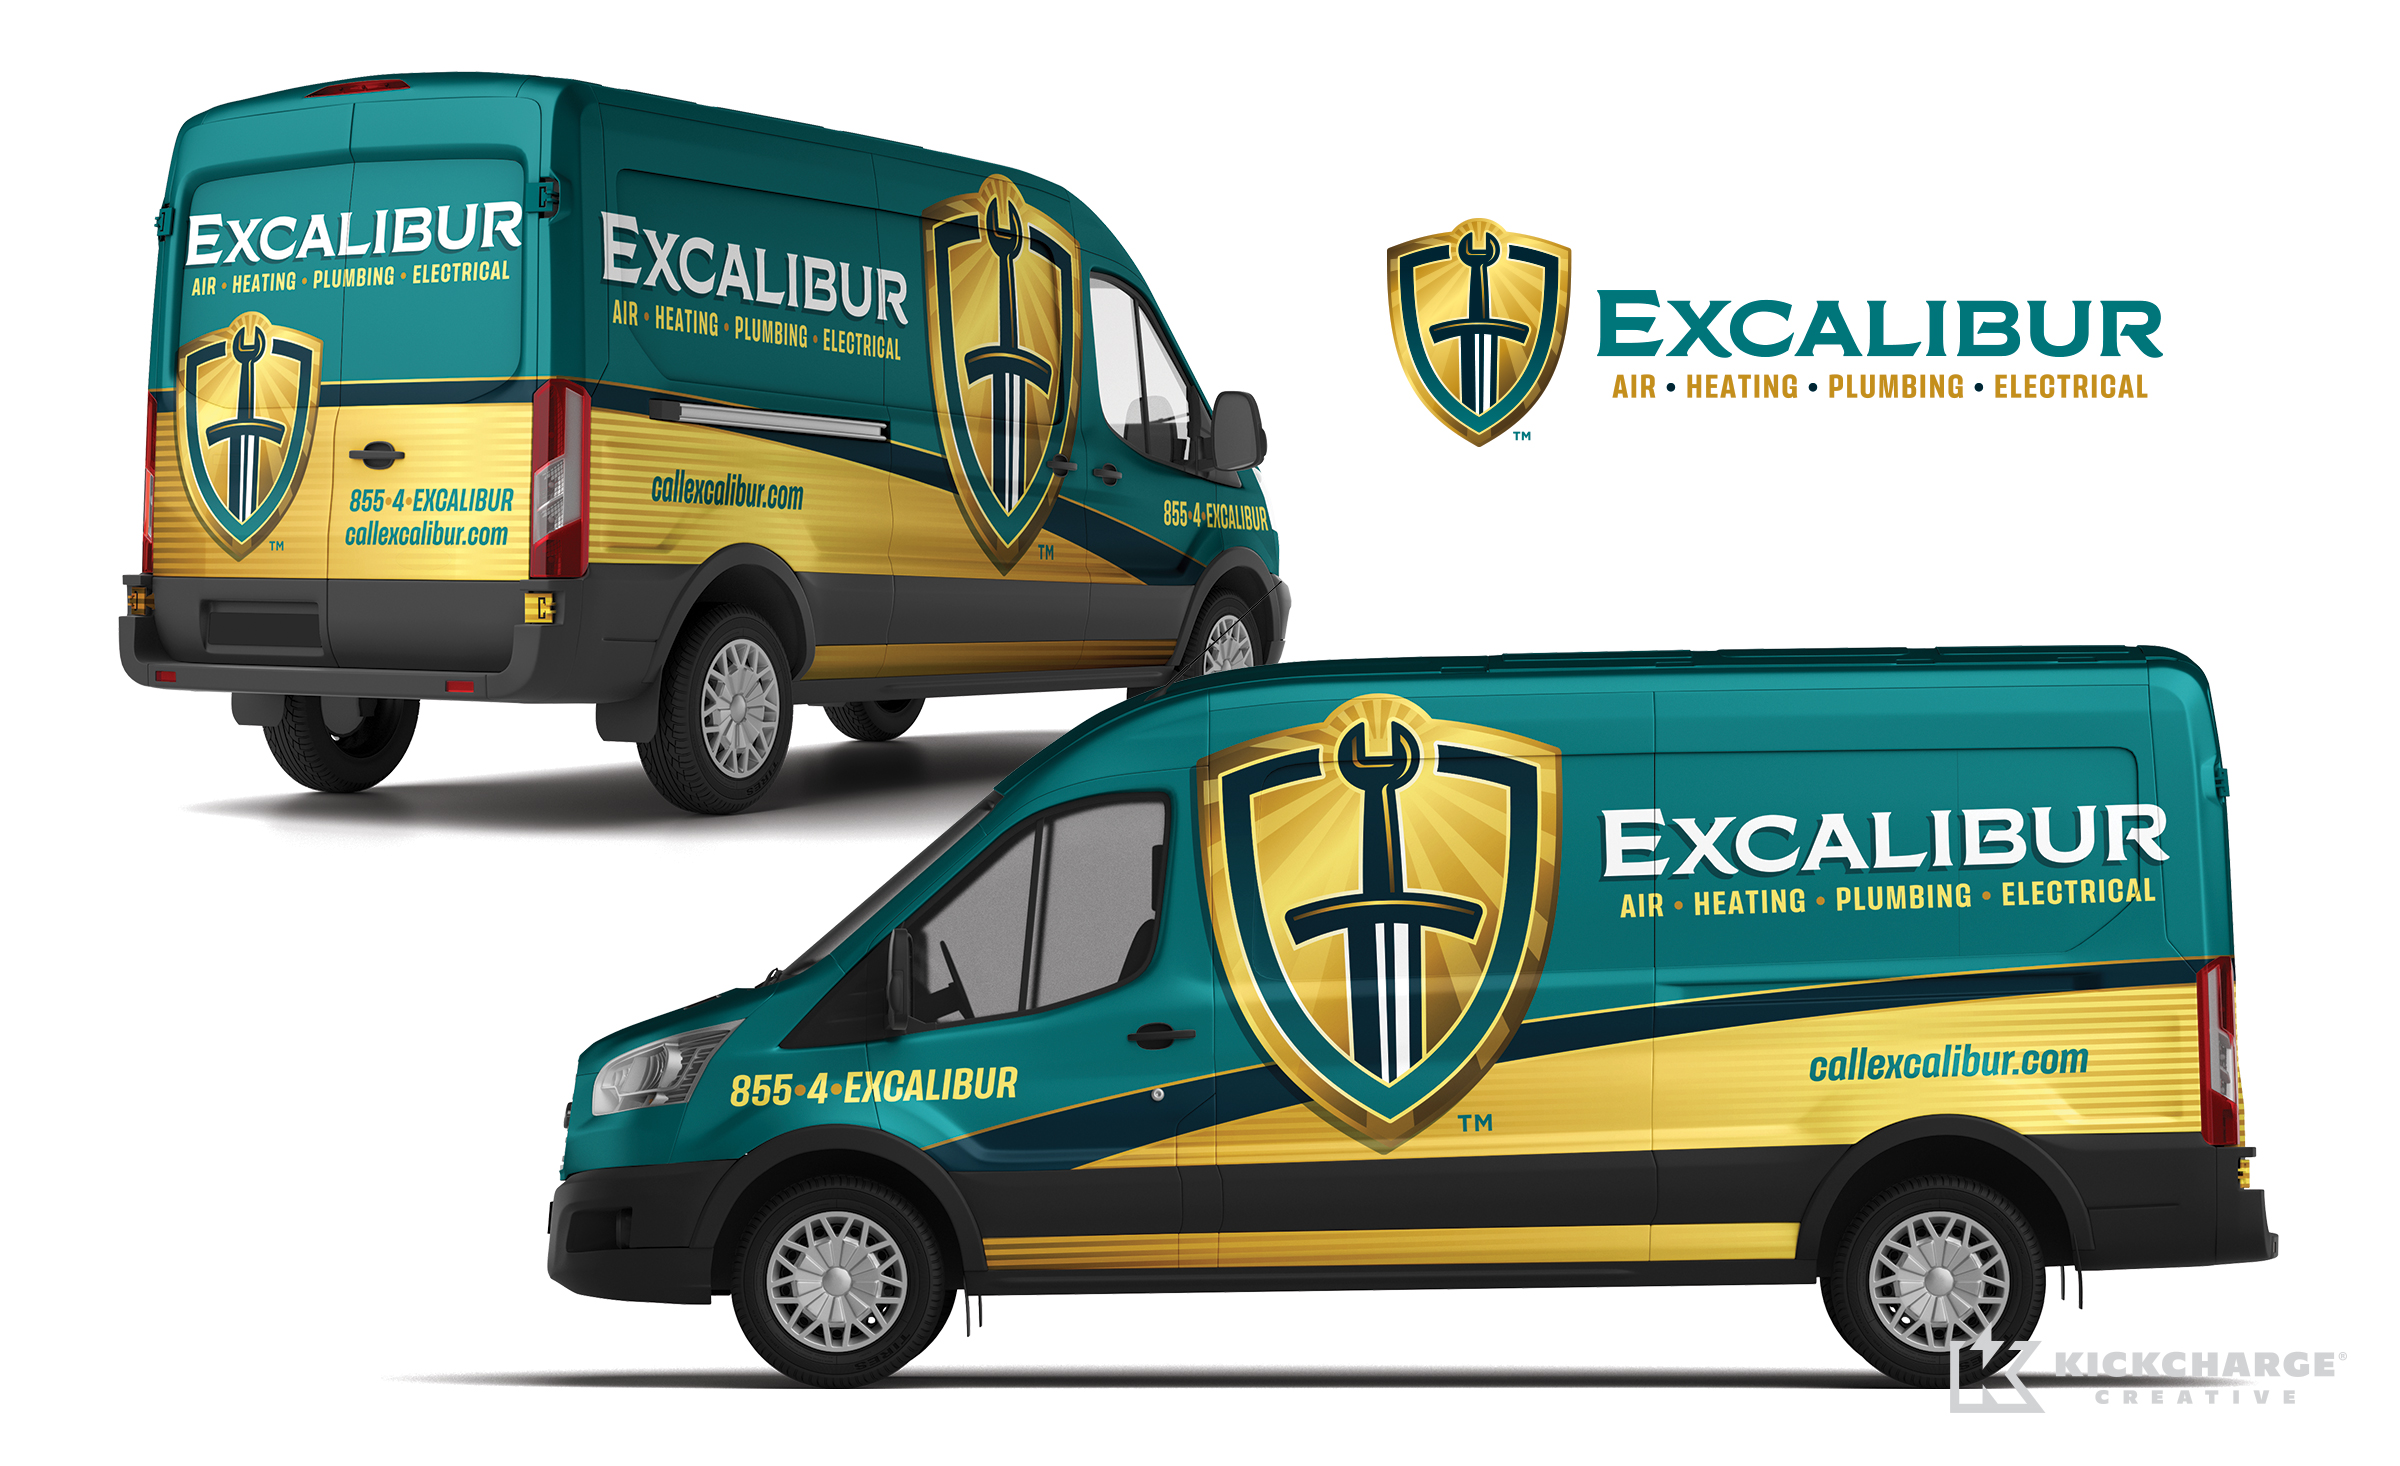 hvac and plumbing truck wrap for Excalibur